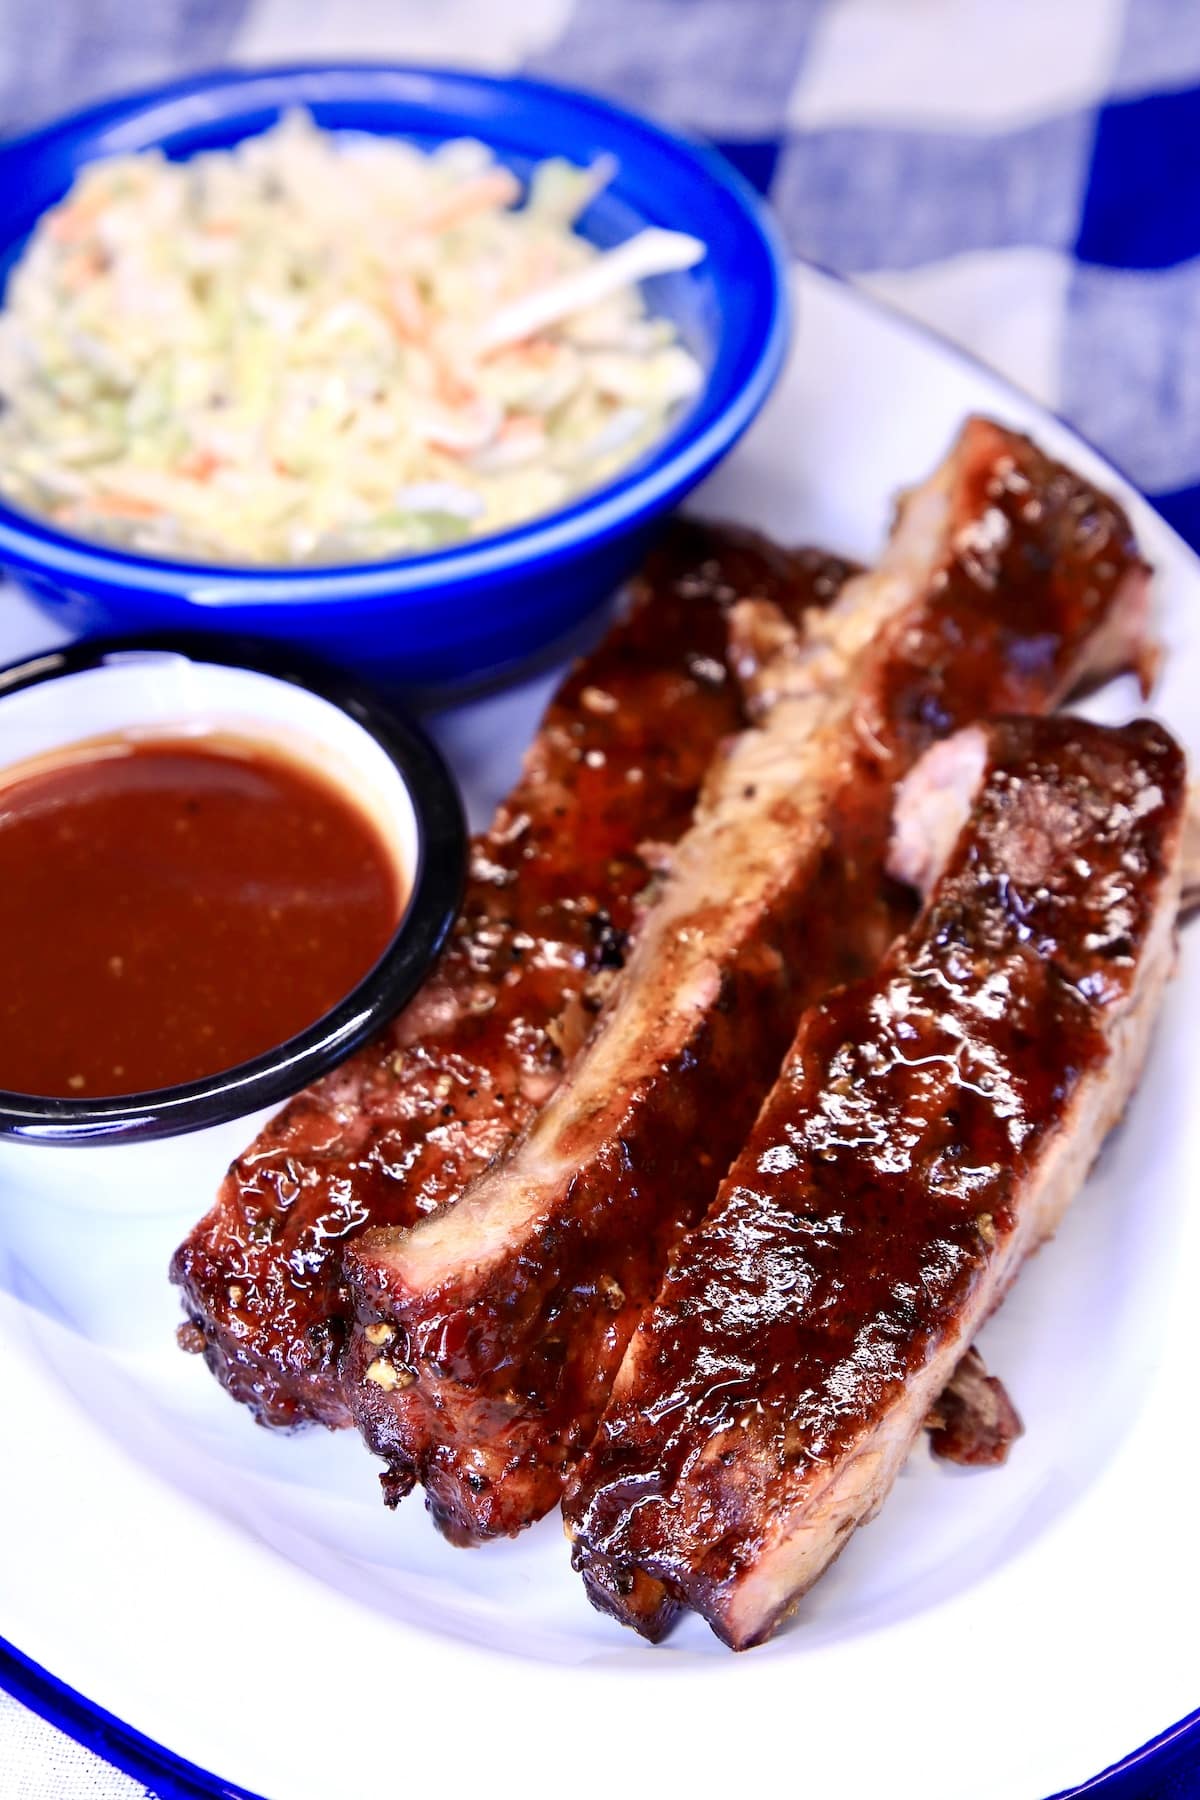 Platter of ribs with sauce and slaw.